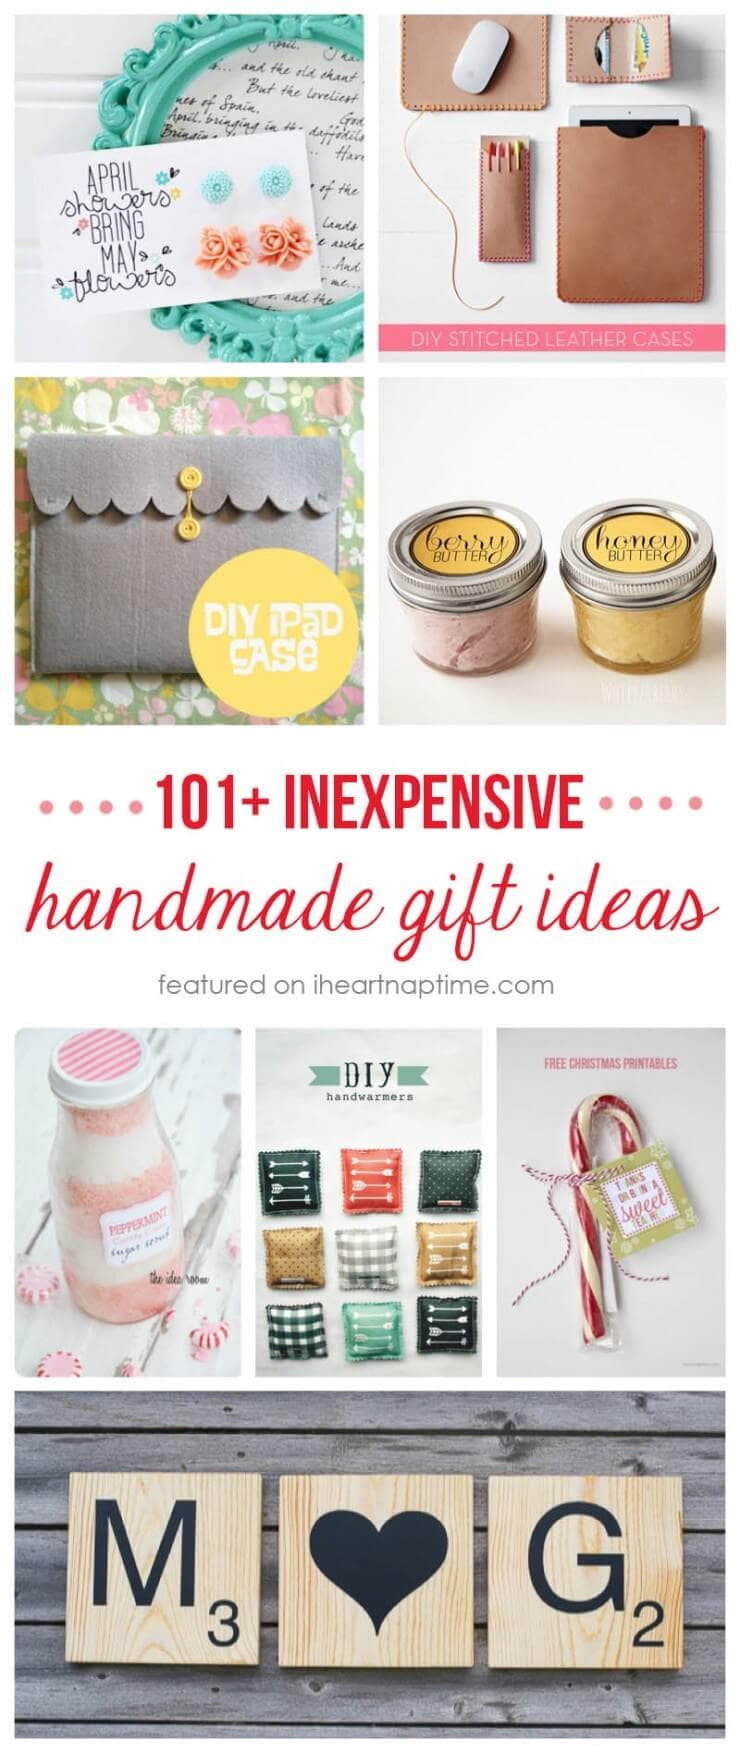 Christmas DIY Gifts
 50 homemade t ideas to make for under $5 I Heart Nap Time